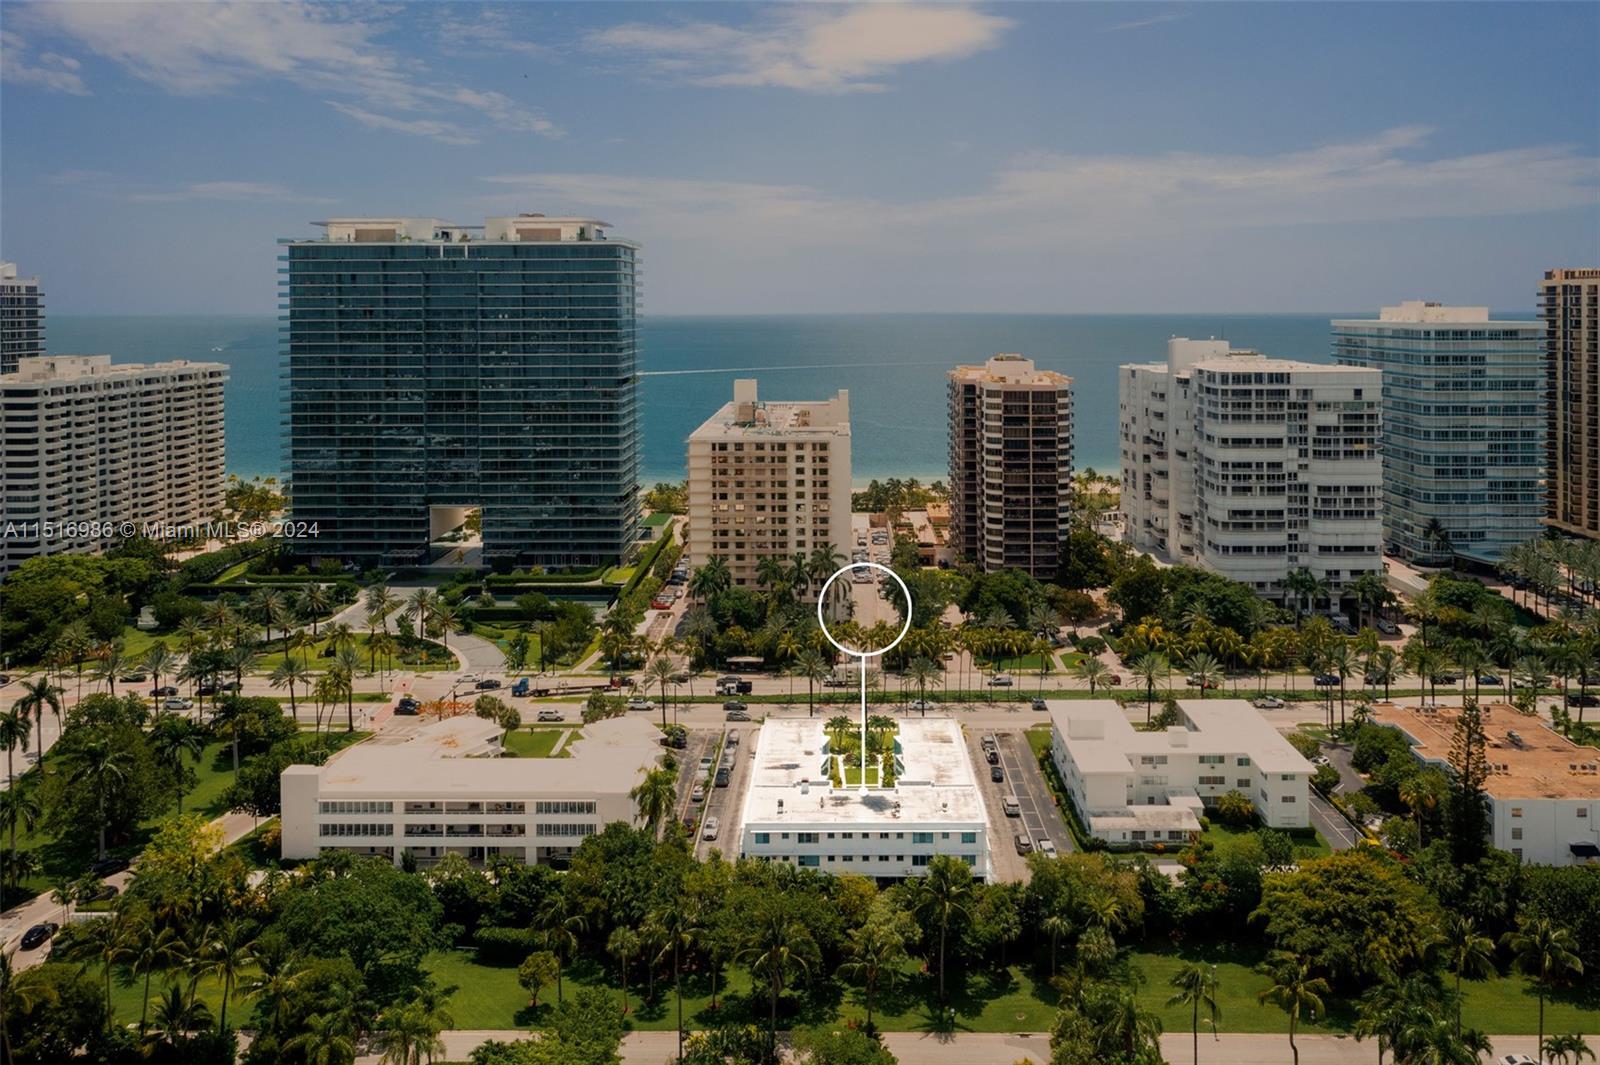 Spectacular and spacious 1B | 1B on Collins in the City of Bal Harbour. Granite countertops in the kitchen, large bedroom, large living room and murphy bed area. Well maintained unit with floor to ceiling windows, with a great views to the garden. One covered and guest parking. Special access to the beach***